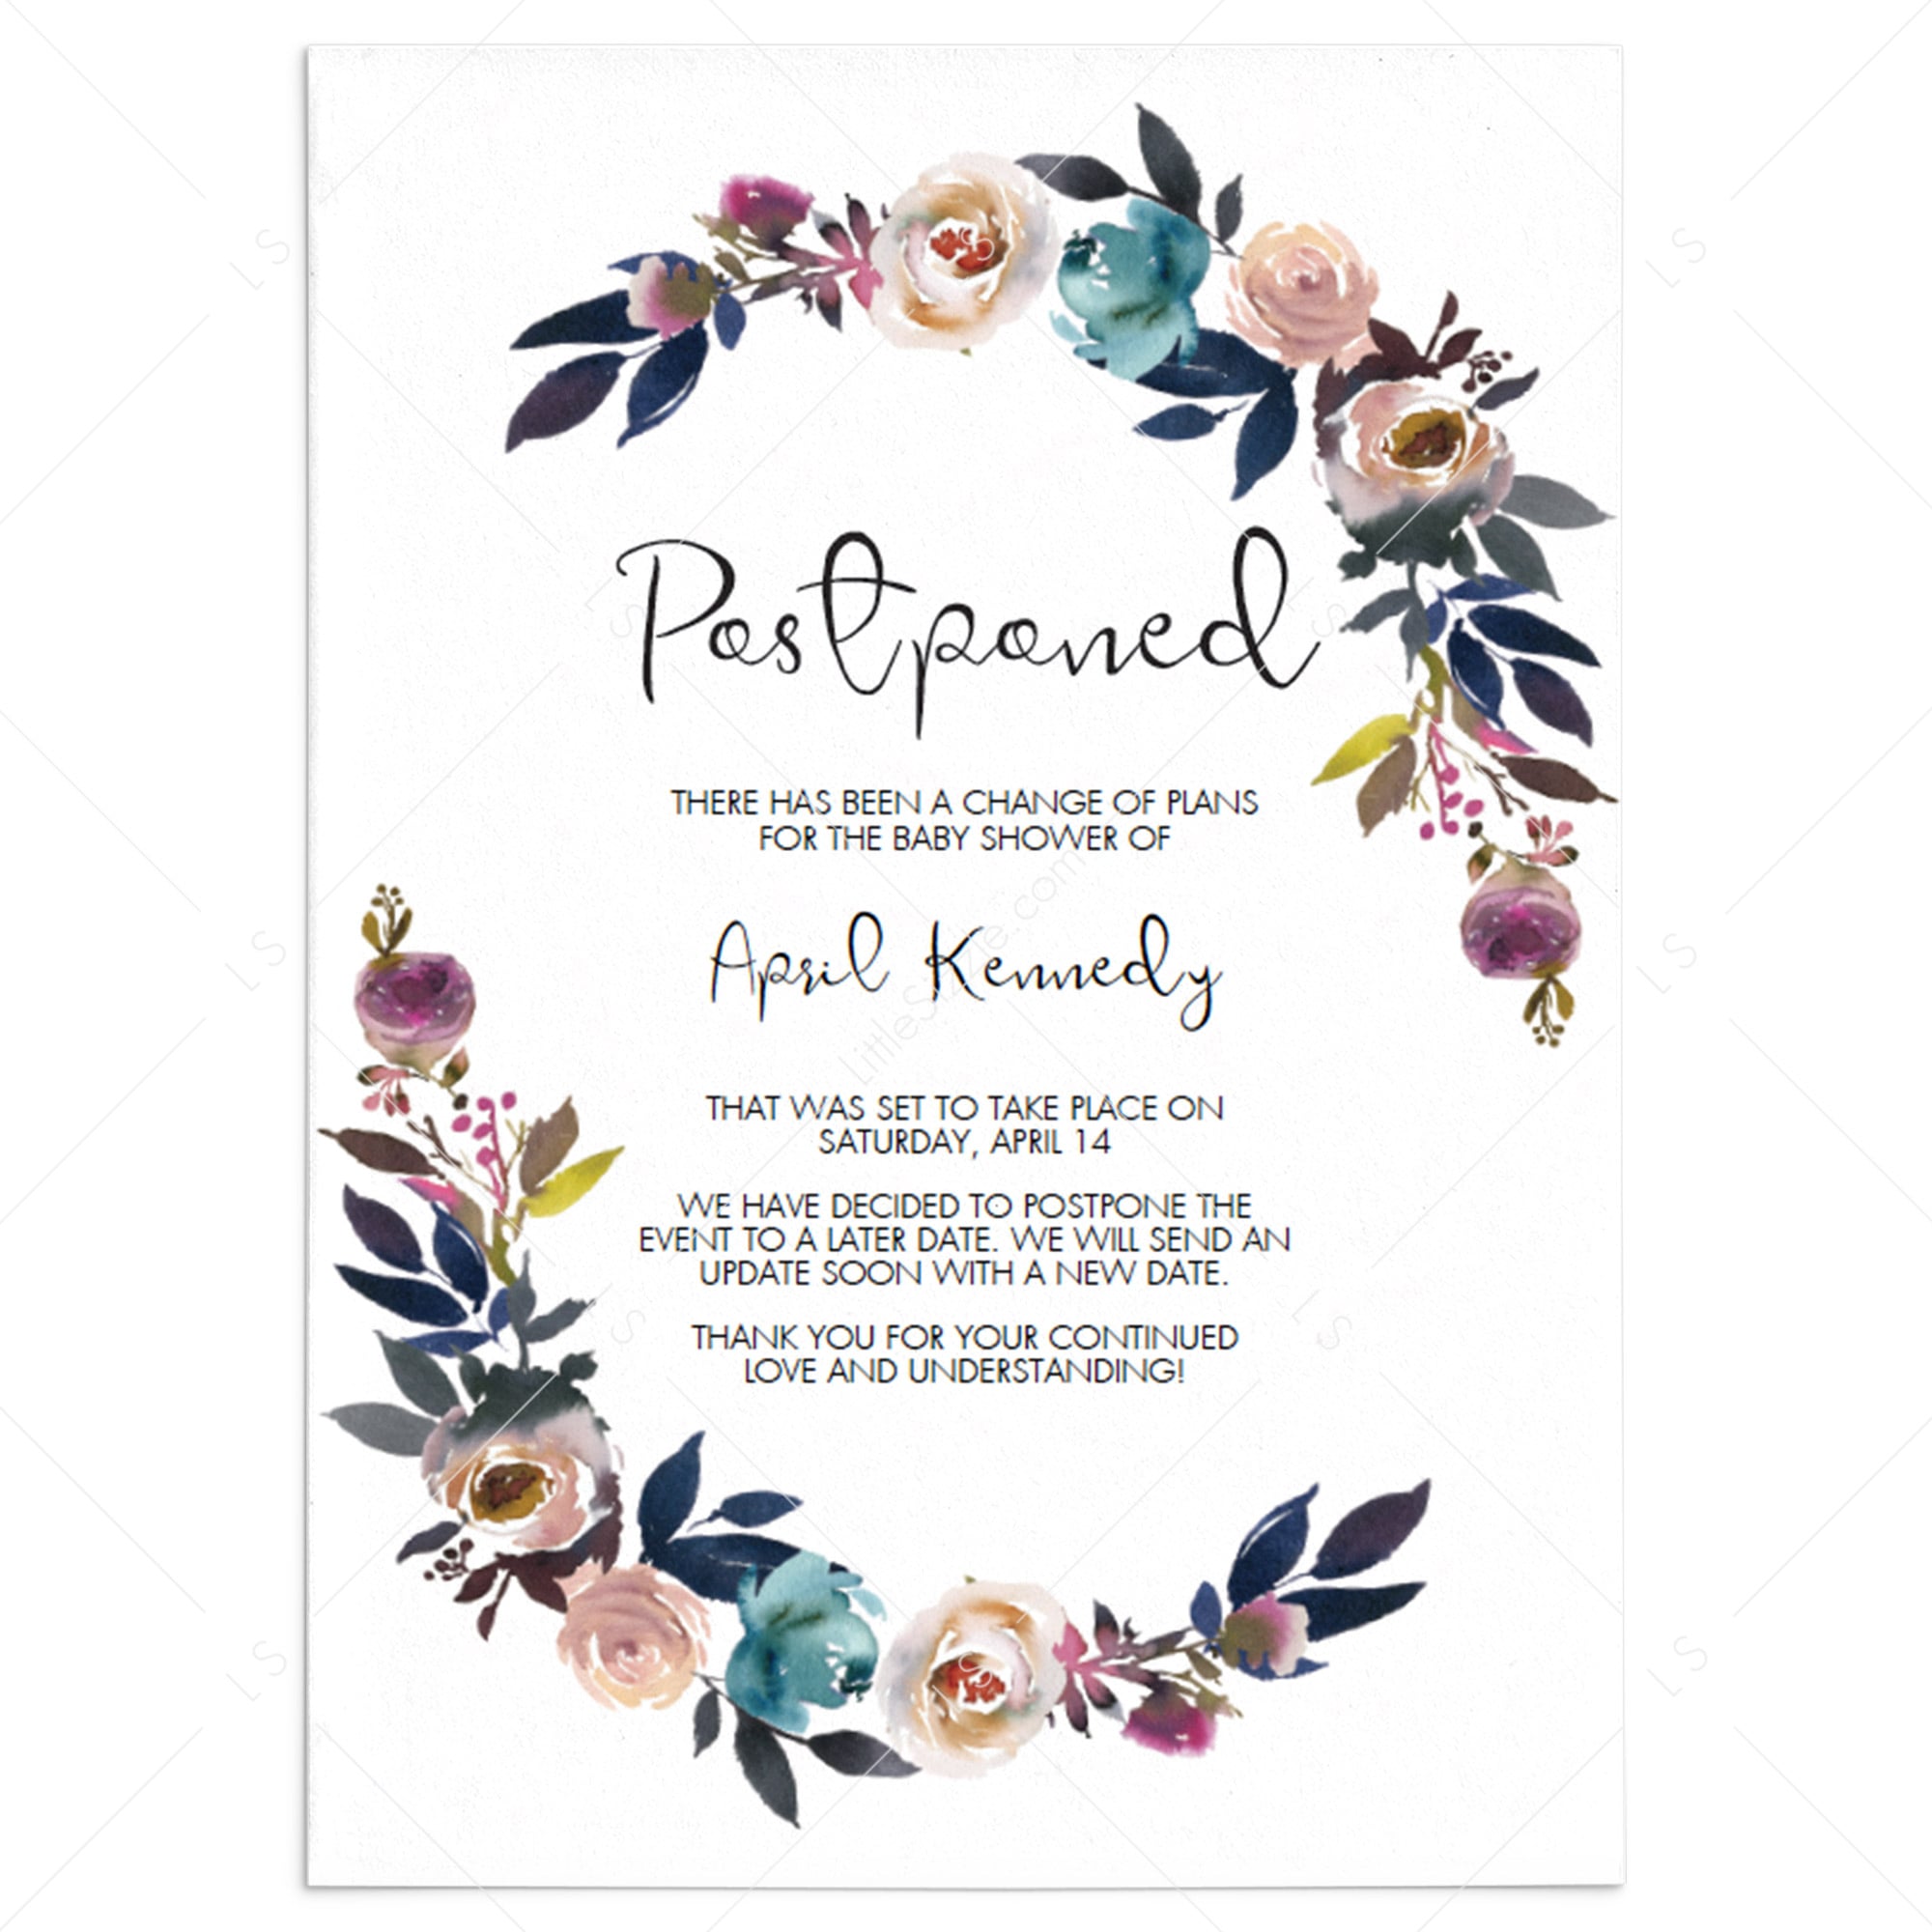 Postponed Baby Shower Card with Floral Wreath Editable Template by LittleSizzle